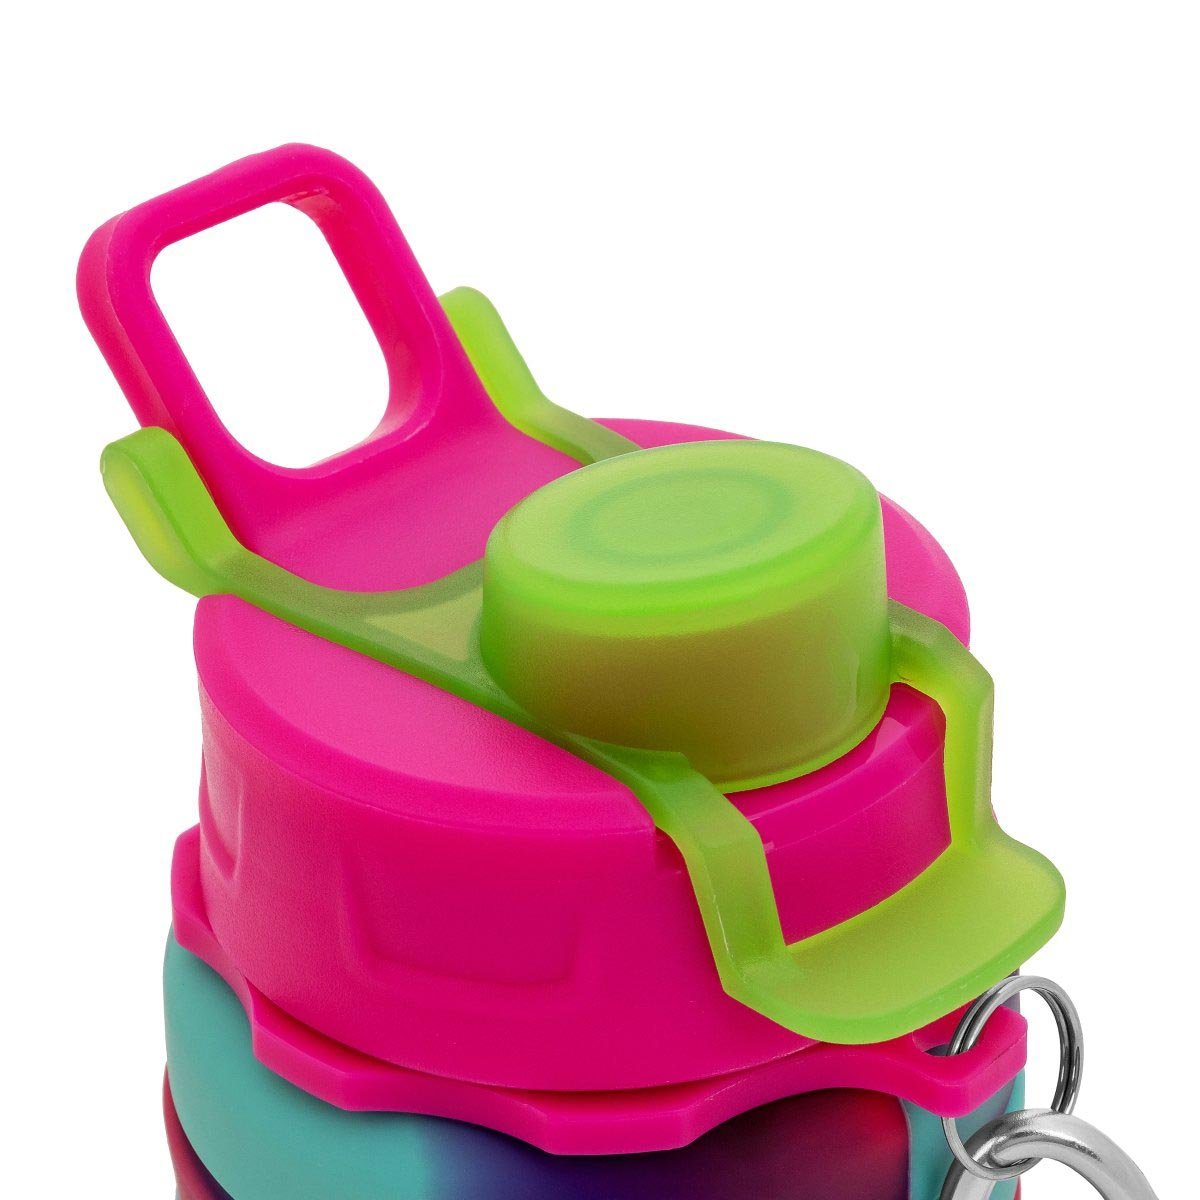 Herrnalise Collapsible Water Bottles 16oz/500ml, Silicone Travel